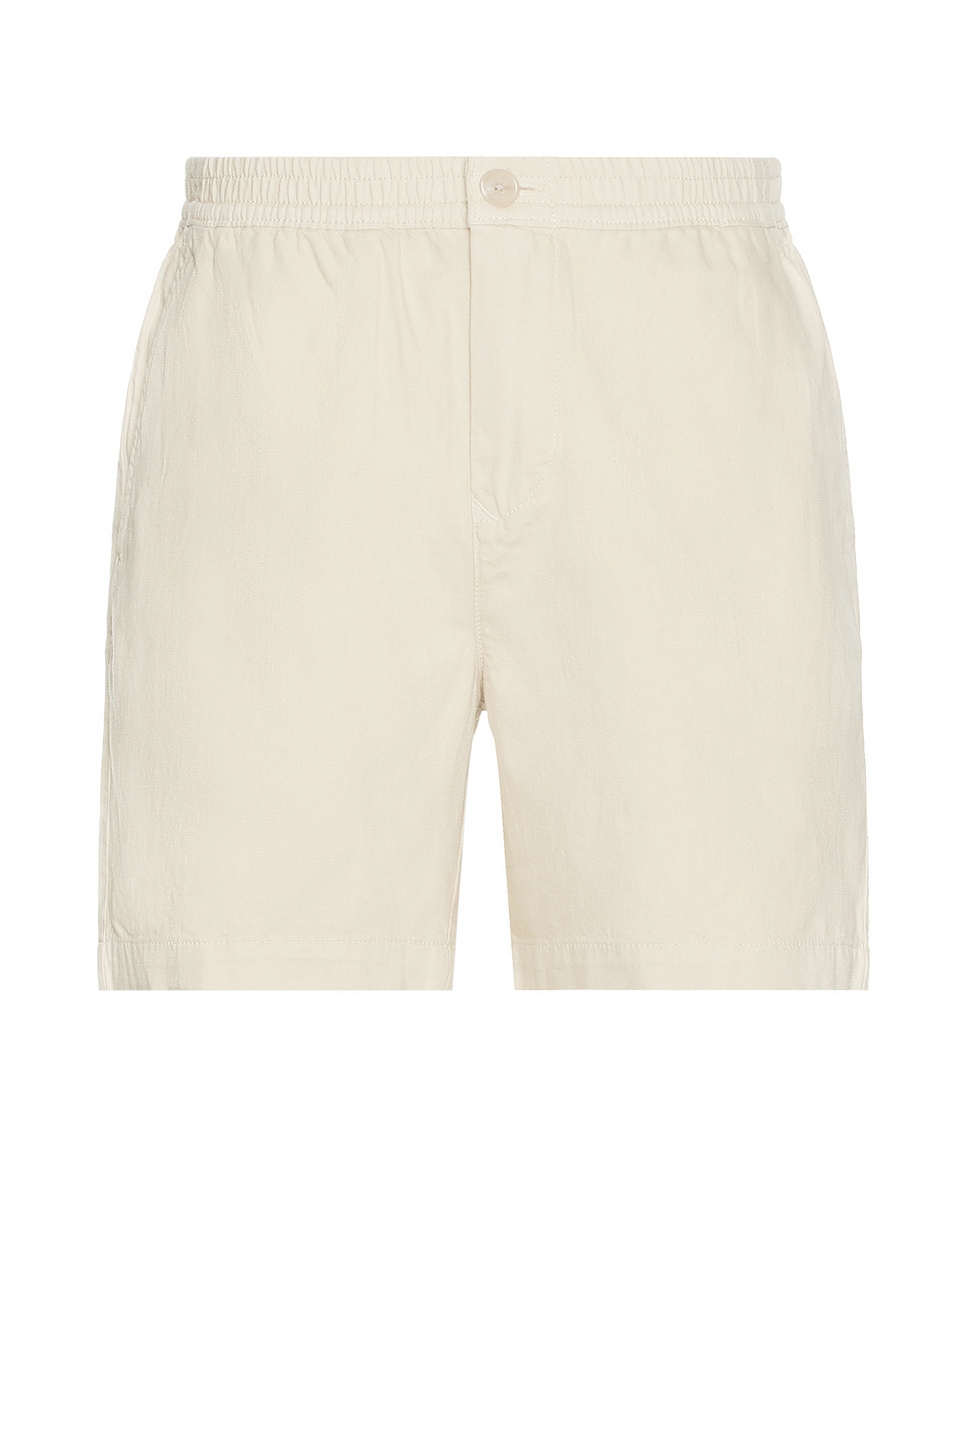 Image 1 of Barbour Melonby Shorts in Mist